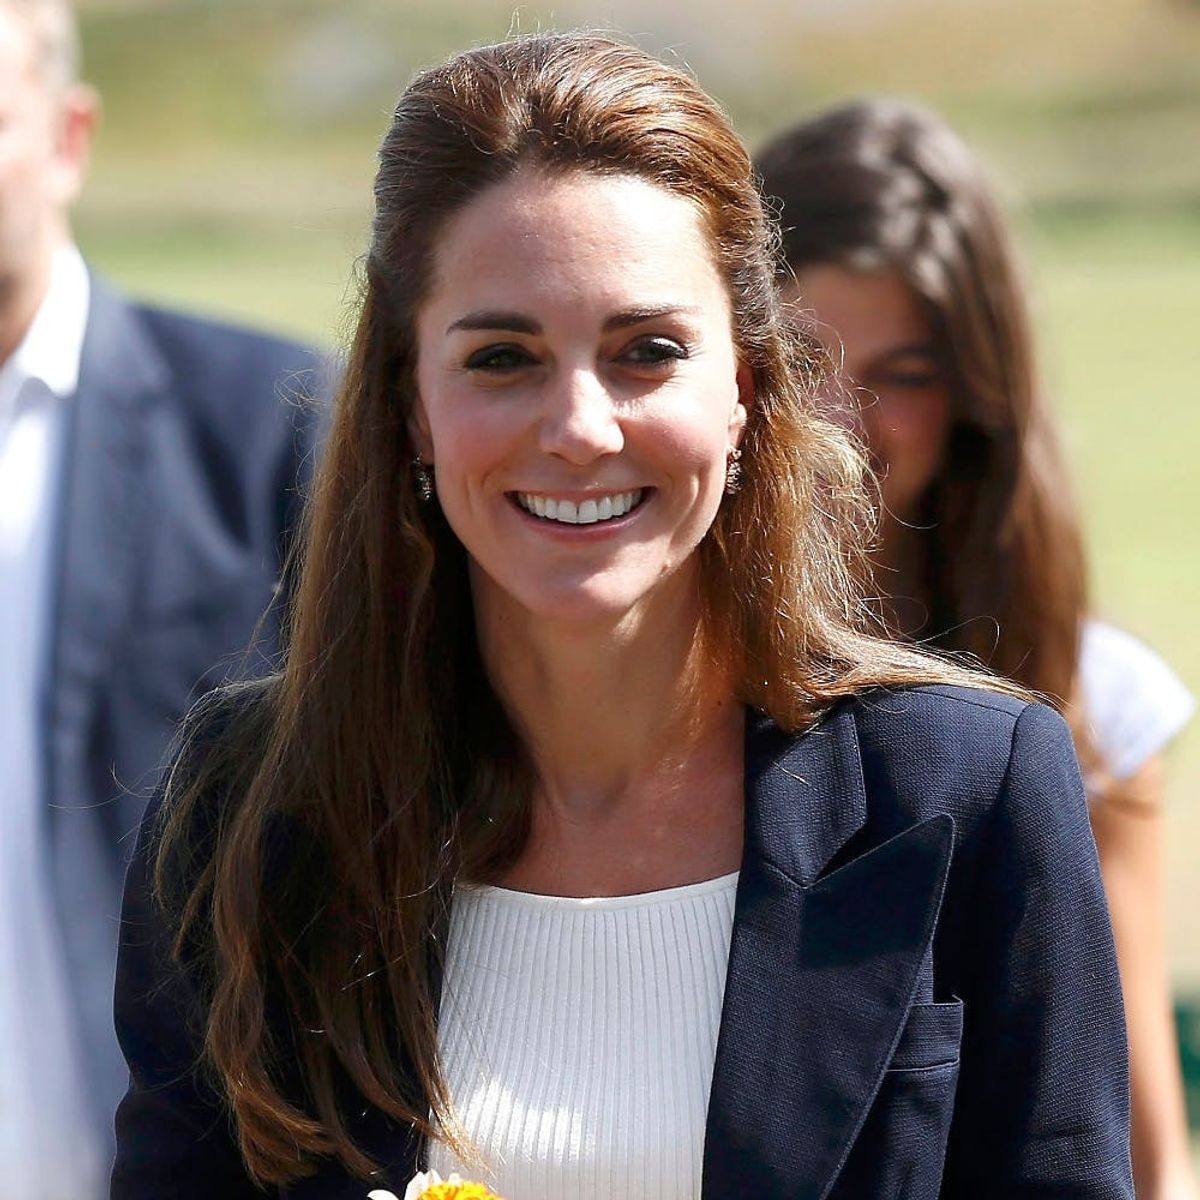 Find Out Where You Can Nab Kate Middleton’s Super Stylish $25 Pants